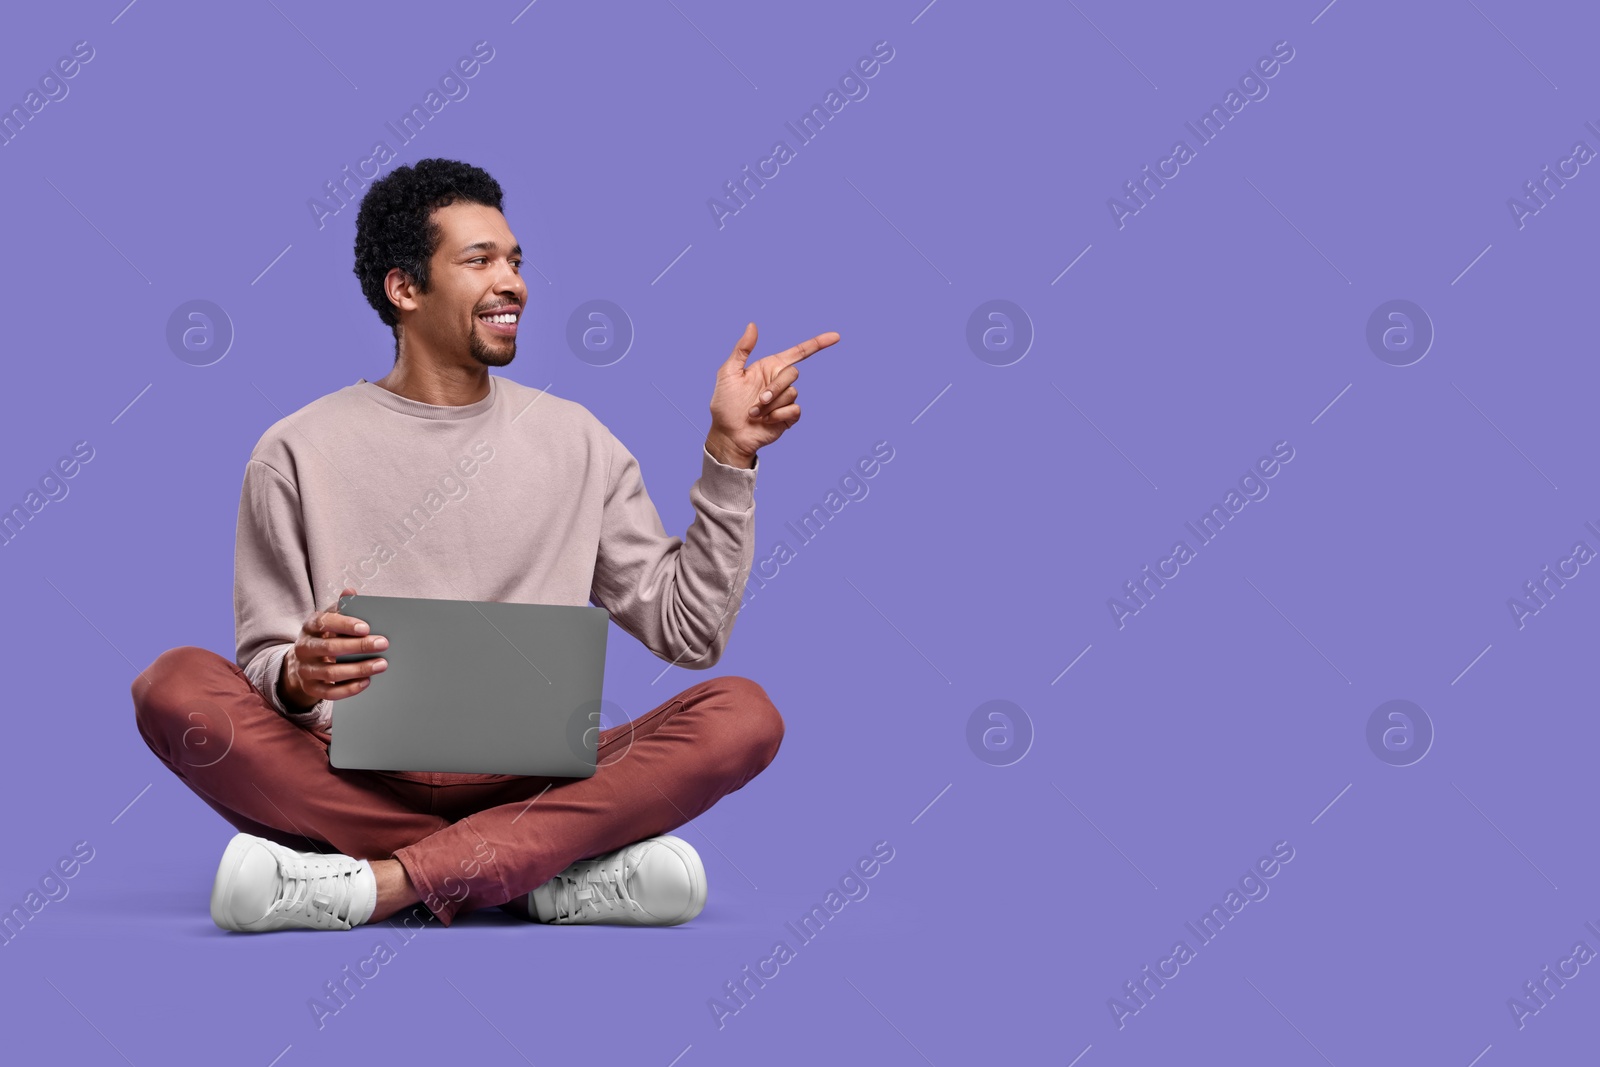 Photo of Happy man with laptop pointing at something on purple background. Space for text